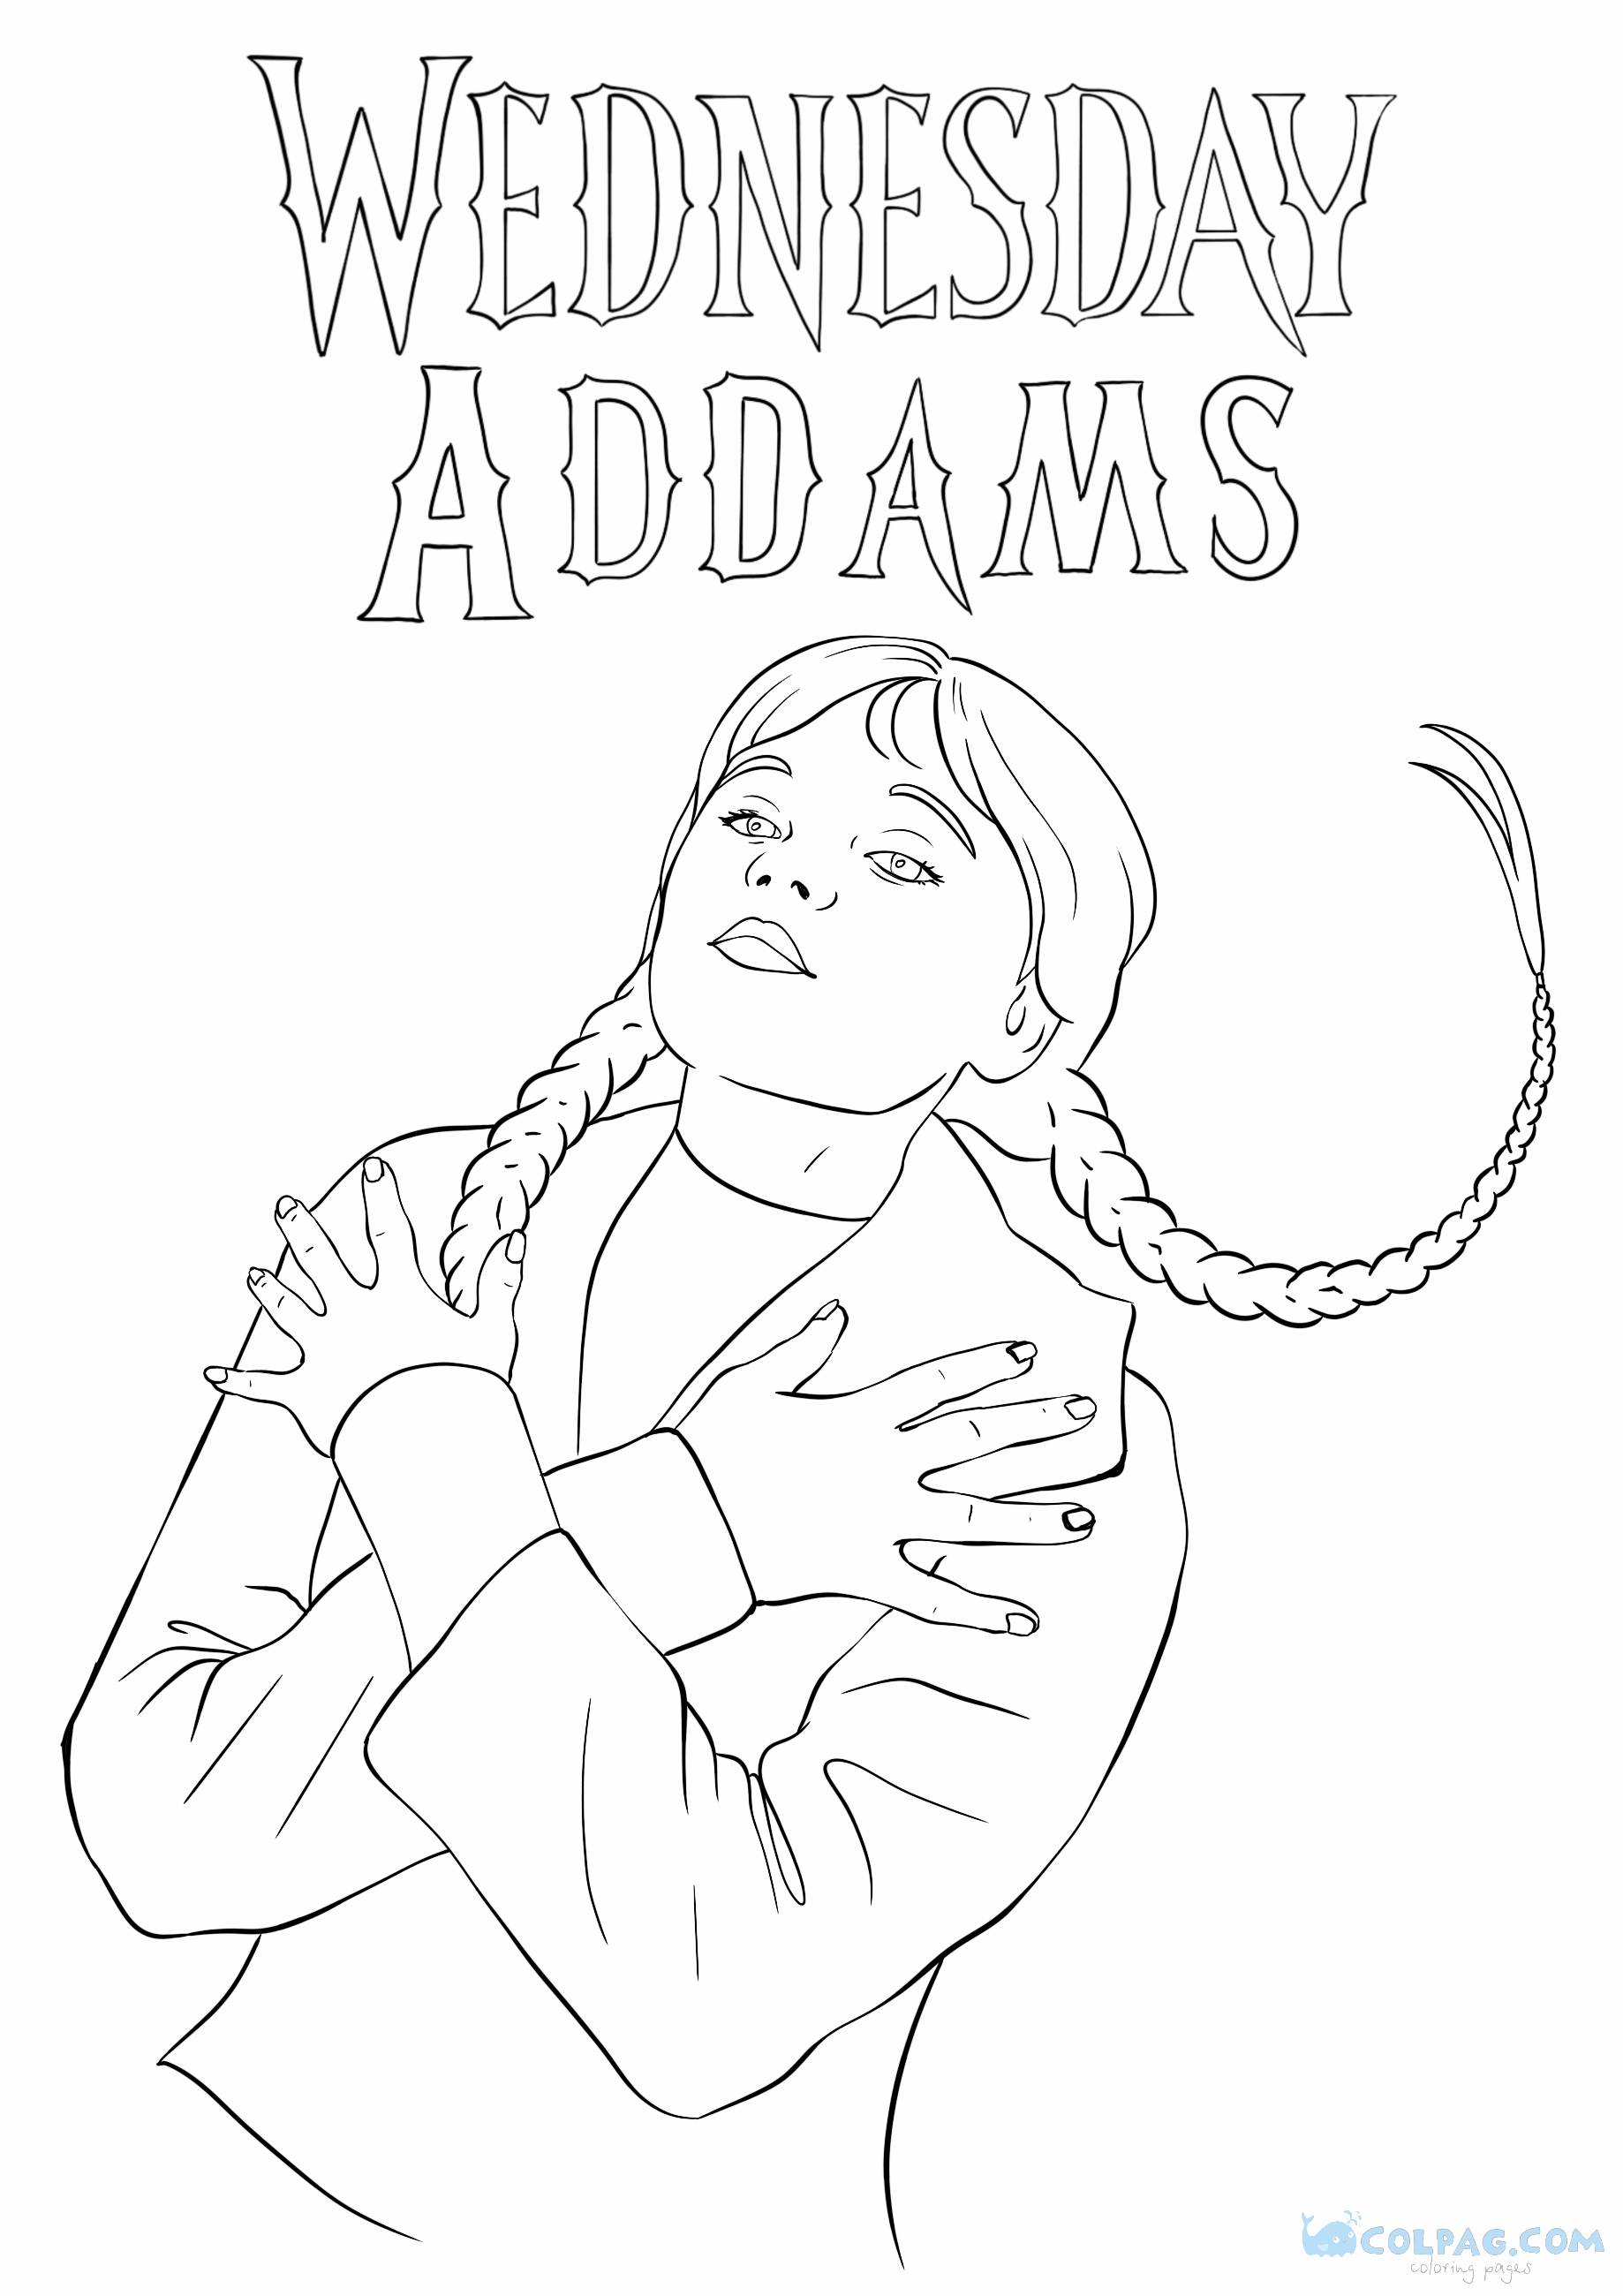 wednesday-addams-coloring-page-colpag-com-18